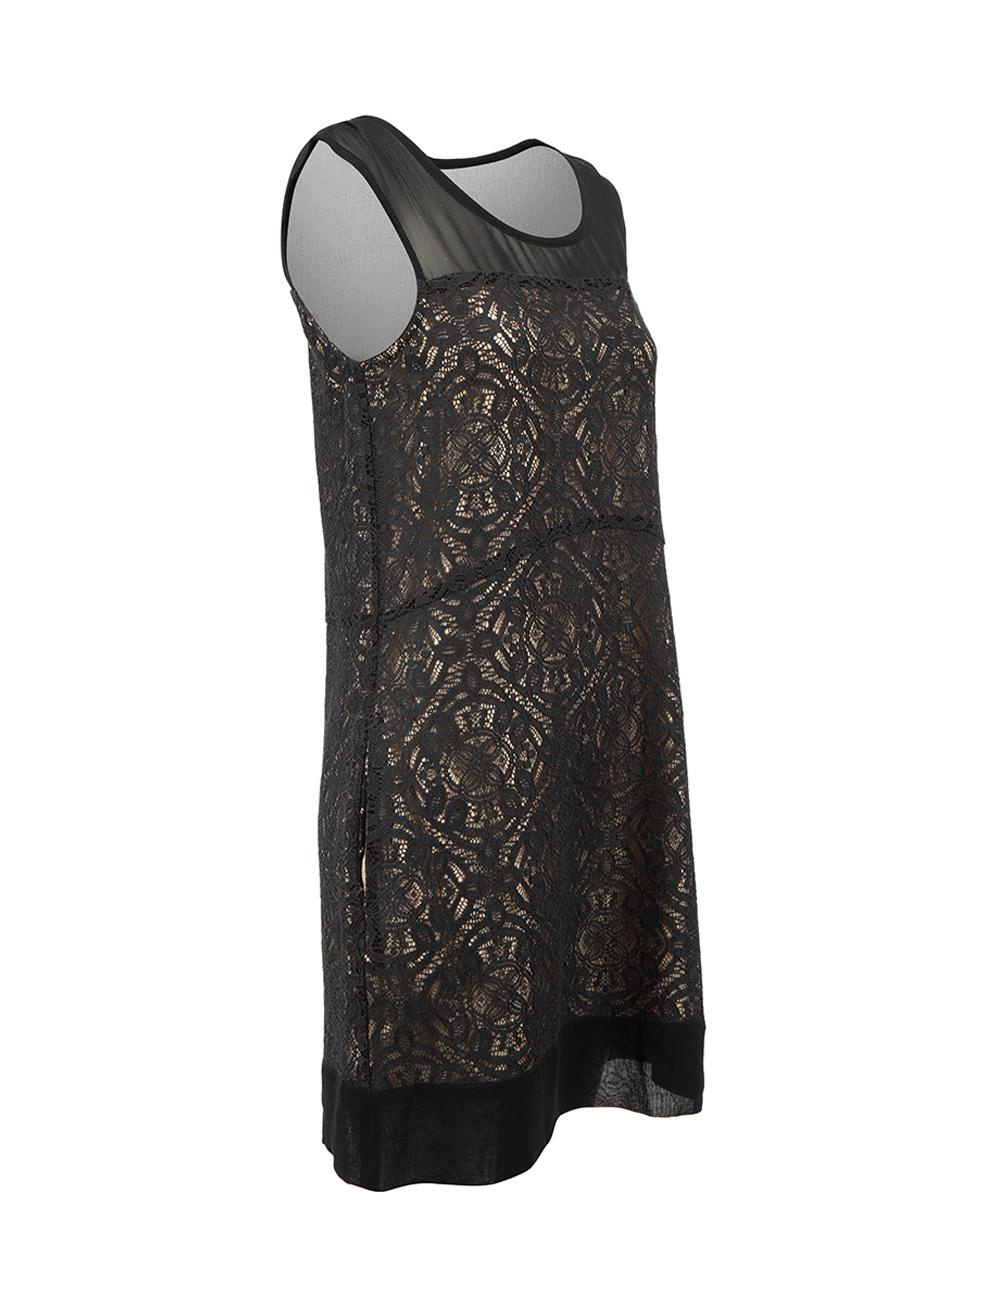 CONDITION is Very good. Hardly any visible wear to dress is evident on this used Marc Jacobs designer resale item.



Details


Black

Cotton

Dress

Silk sheer upper body

Lace lower body

Sleeveless

Round neckline

2x Side pockets





Made in